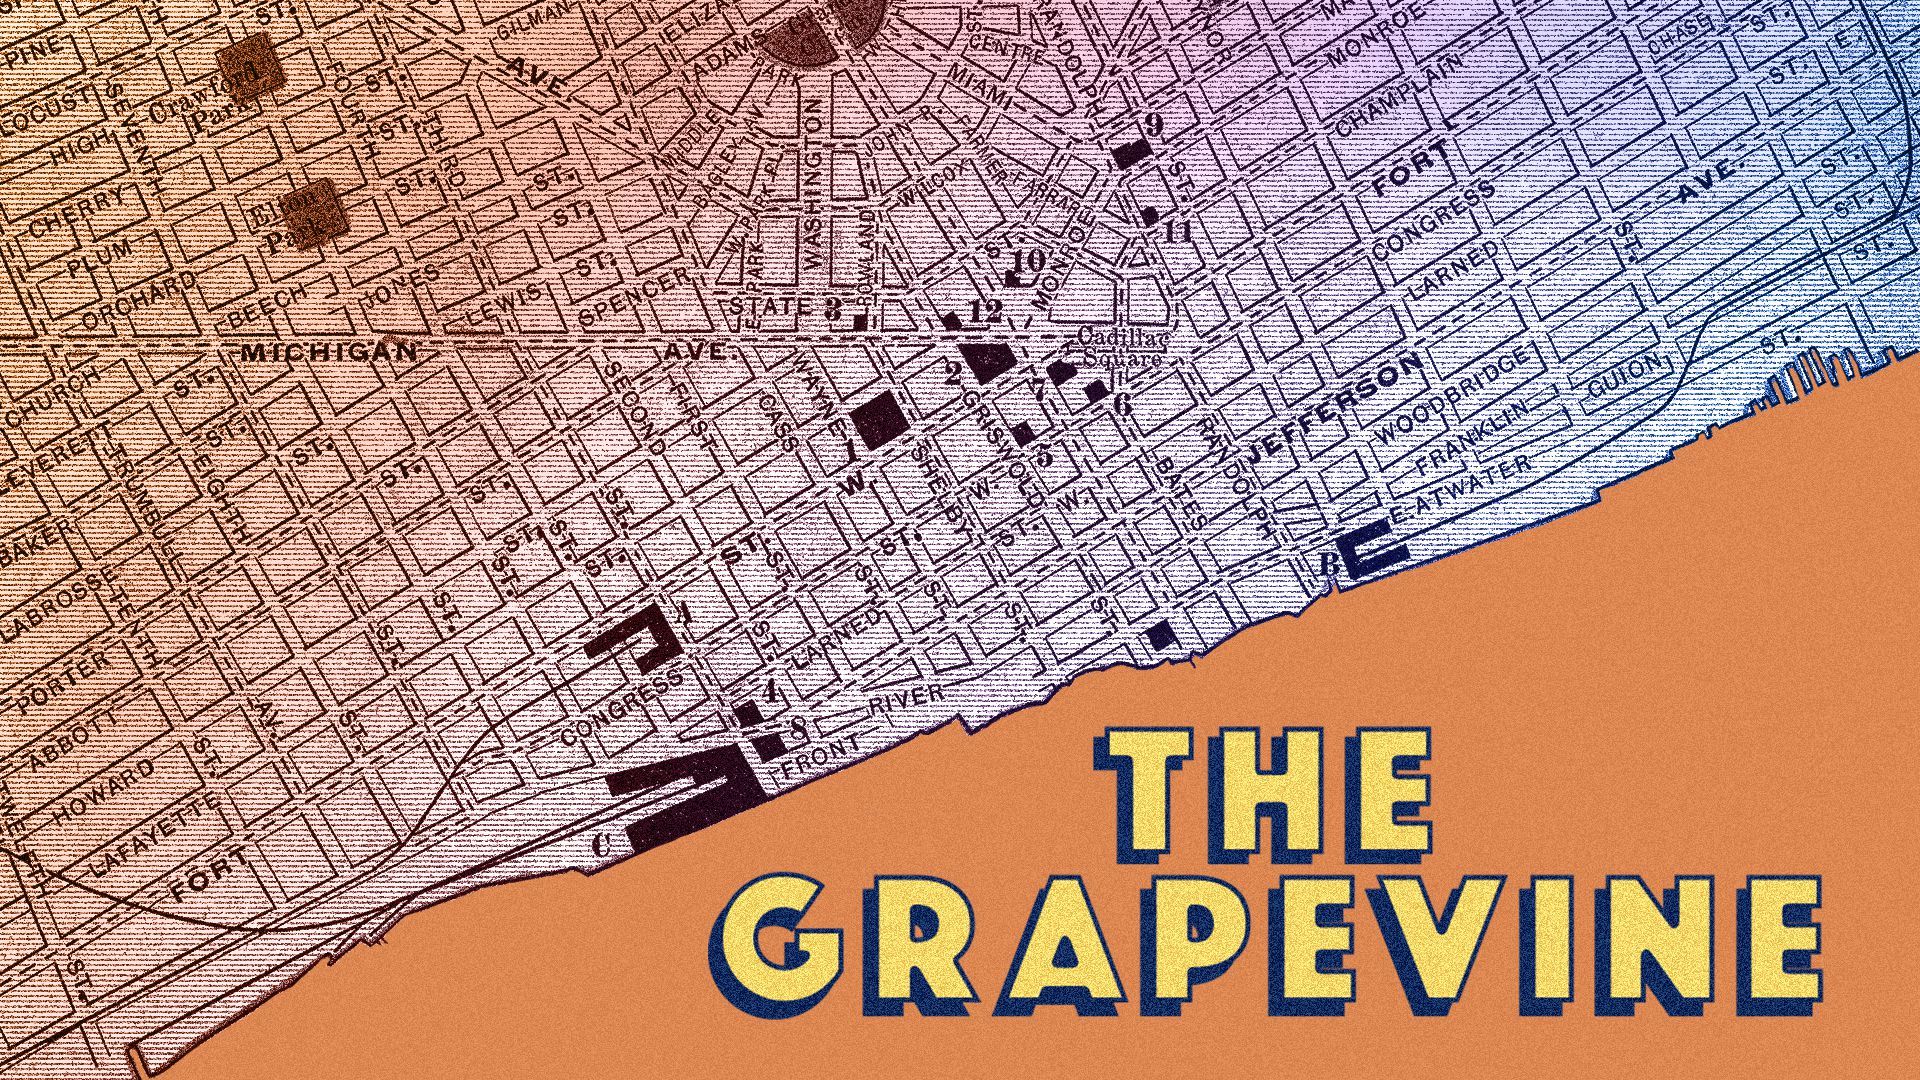 Illustration of a map of Detroit, Michigan and the title "The Grapevine".